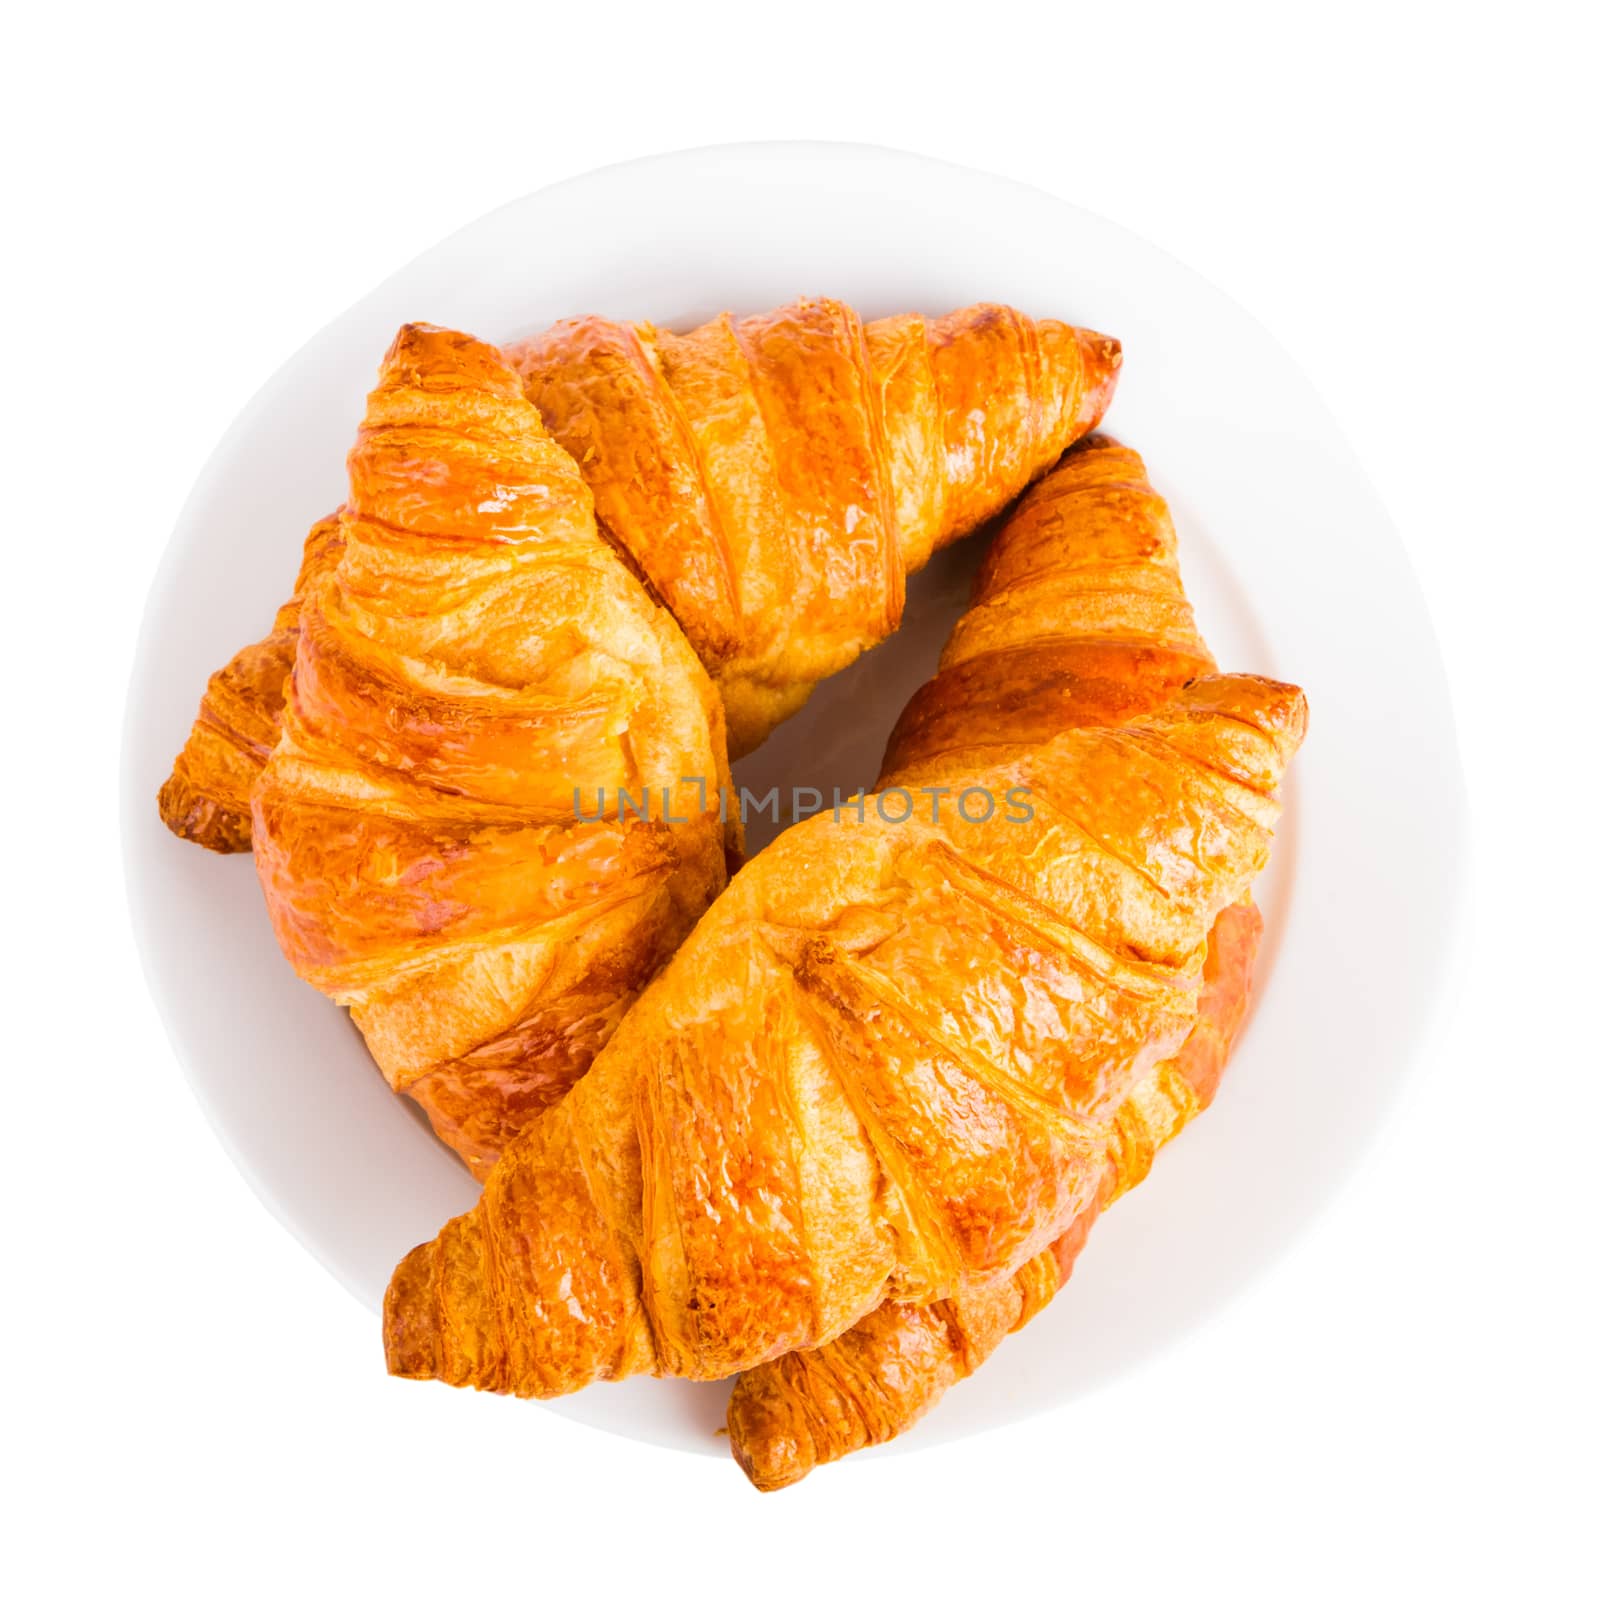 Croissants on a white plate isolated on white